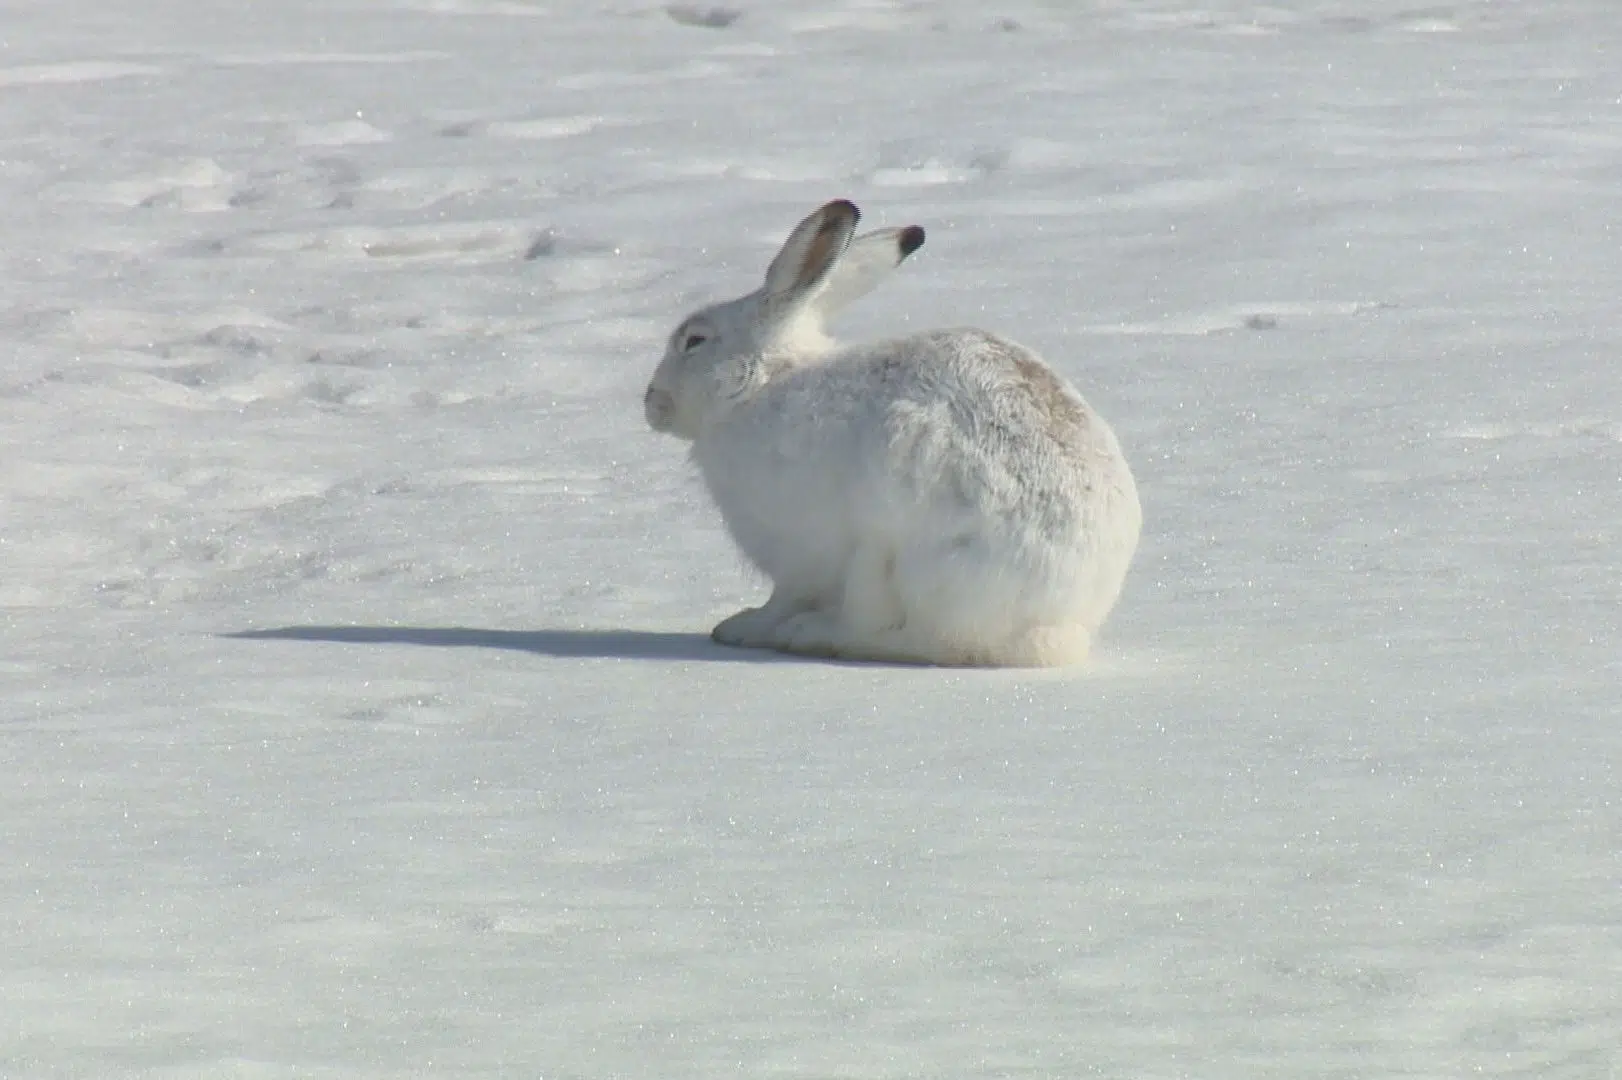 Wildlife biologist skeptical of trapping rabbits in Regina